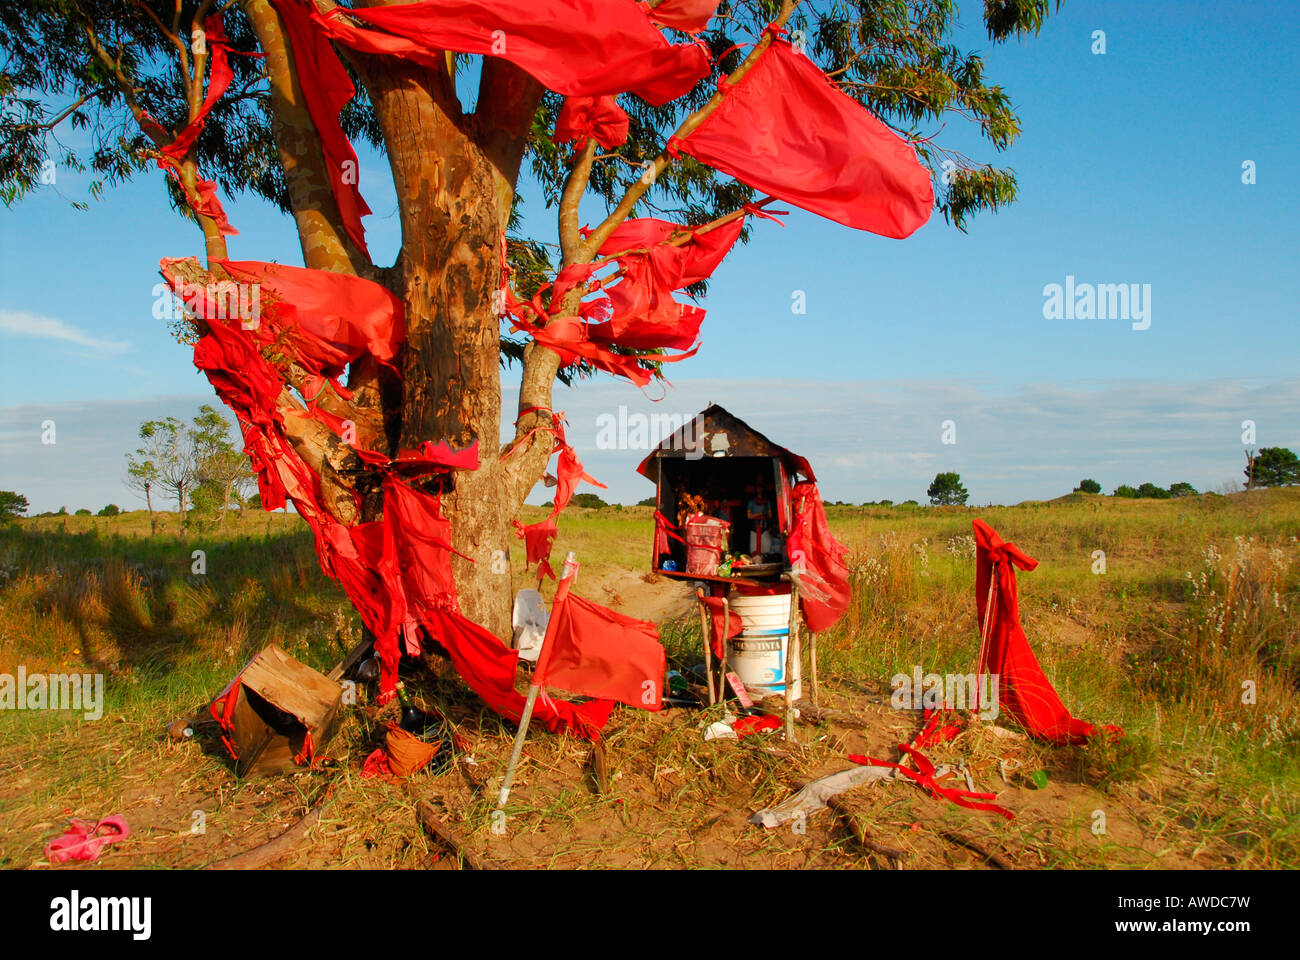 Memorial for Gauchito Gil (argentinian Robin Hood), near Mar Chiquita, Buenos Aires province, Argentina Stock Photo